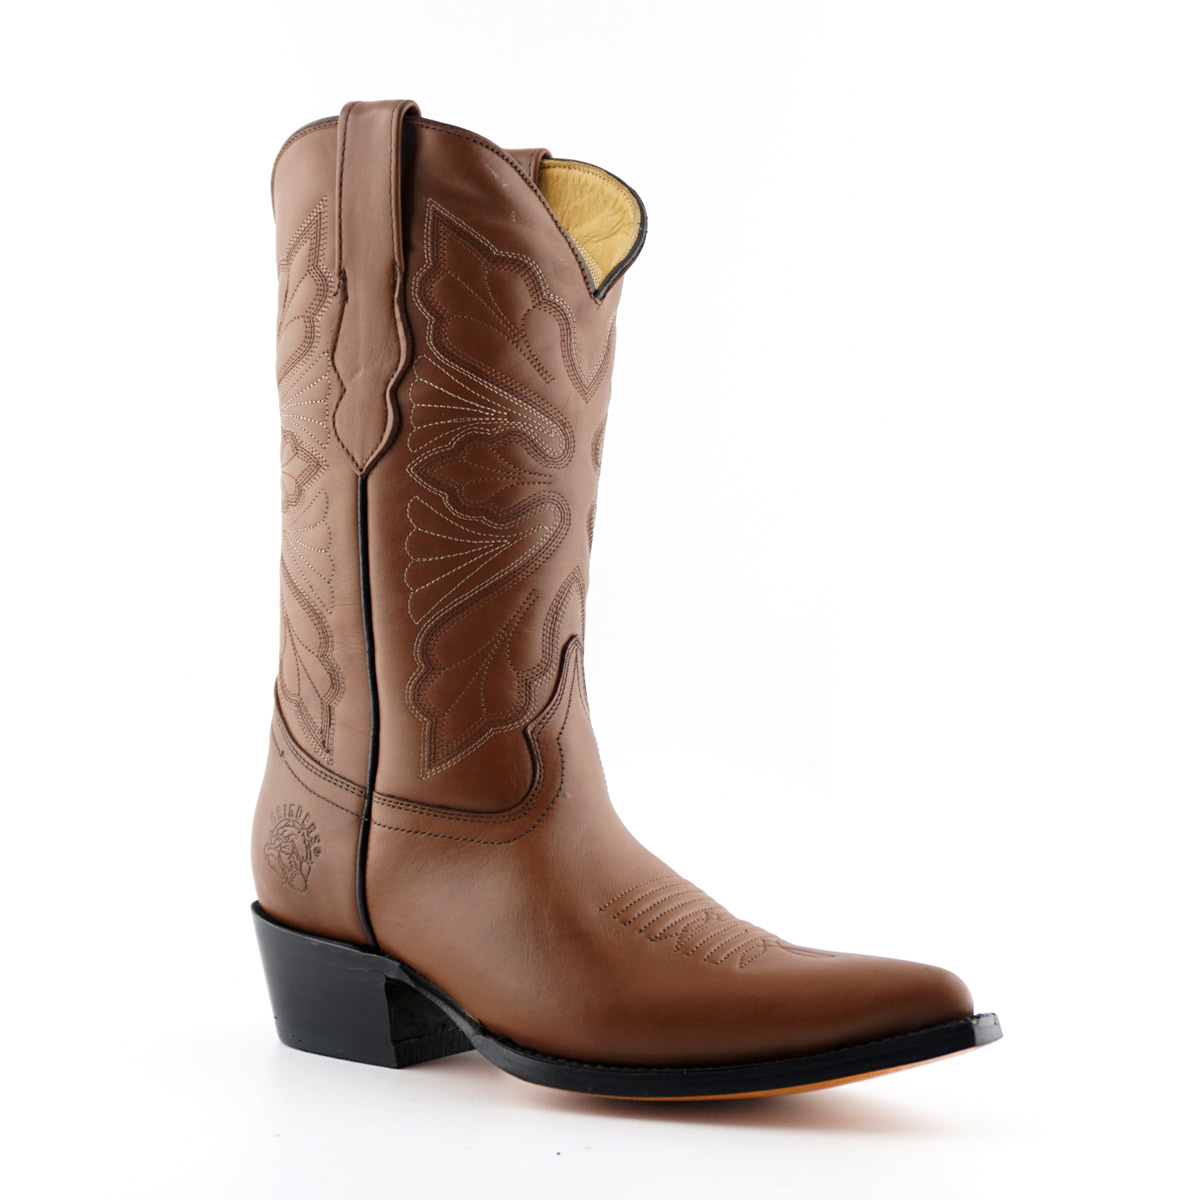 Grinders Dallas Brown Ladies Cowboy Western Mid Calf Toe Classic Leather Boots 